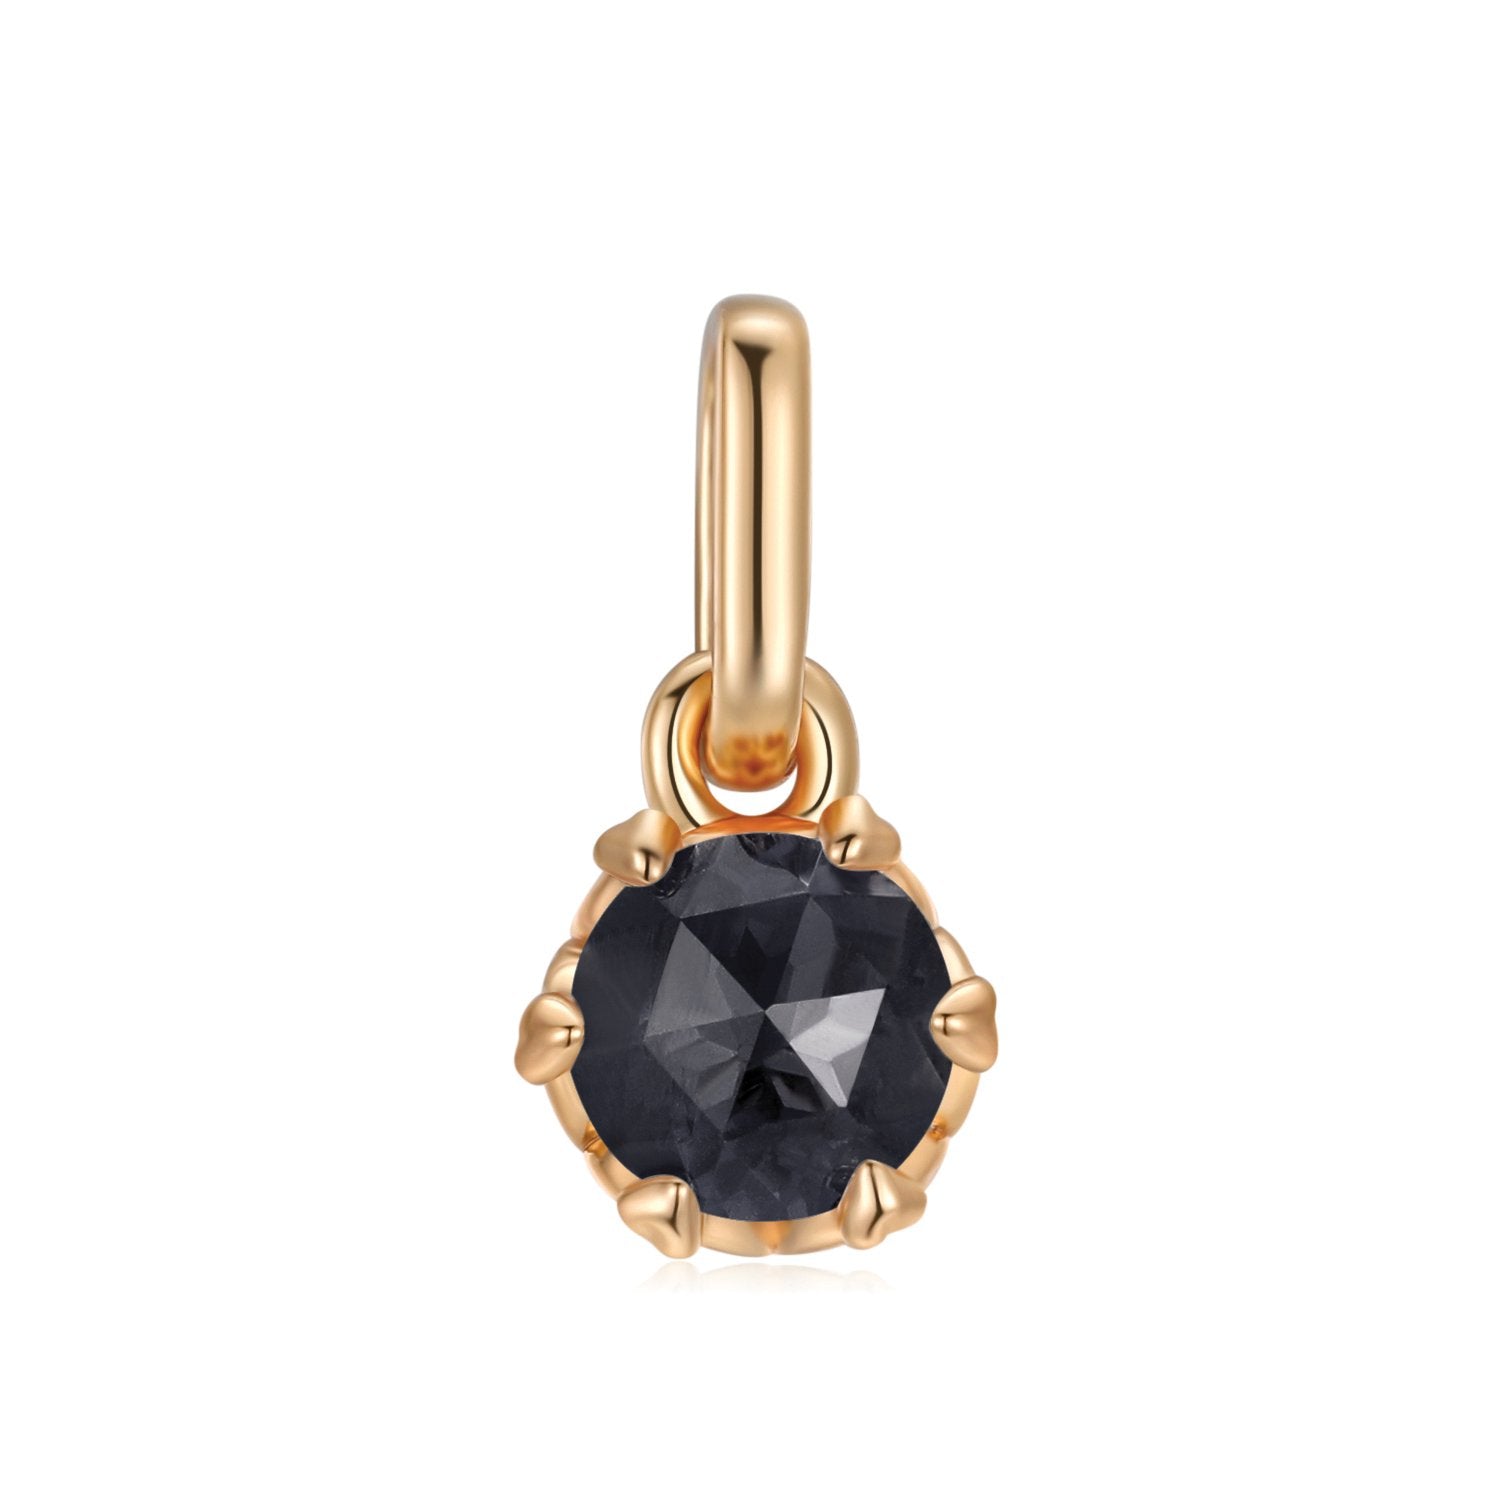 Gold Heart Prong-Set Black Spinel Pendant - LOVE BY THE MOON